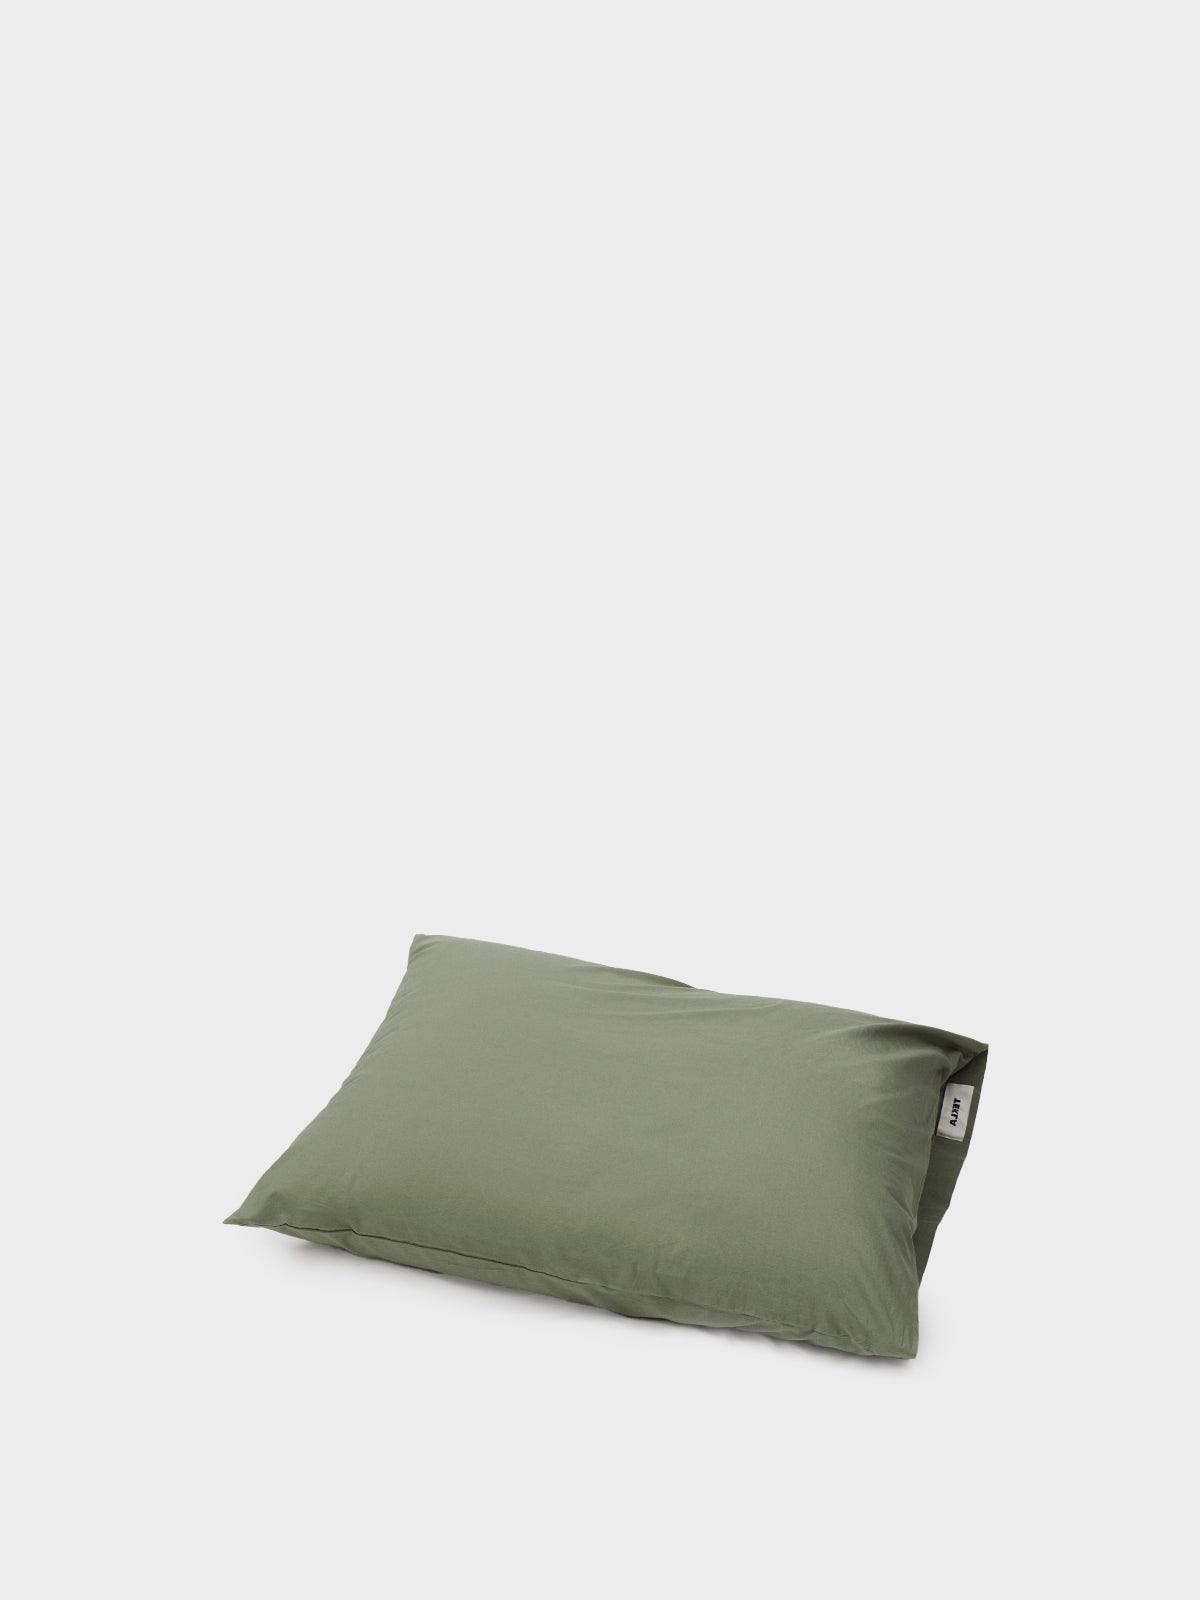 Tekla - Percale Pillow Sham in Olive Green